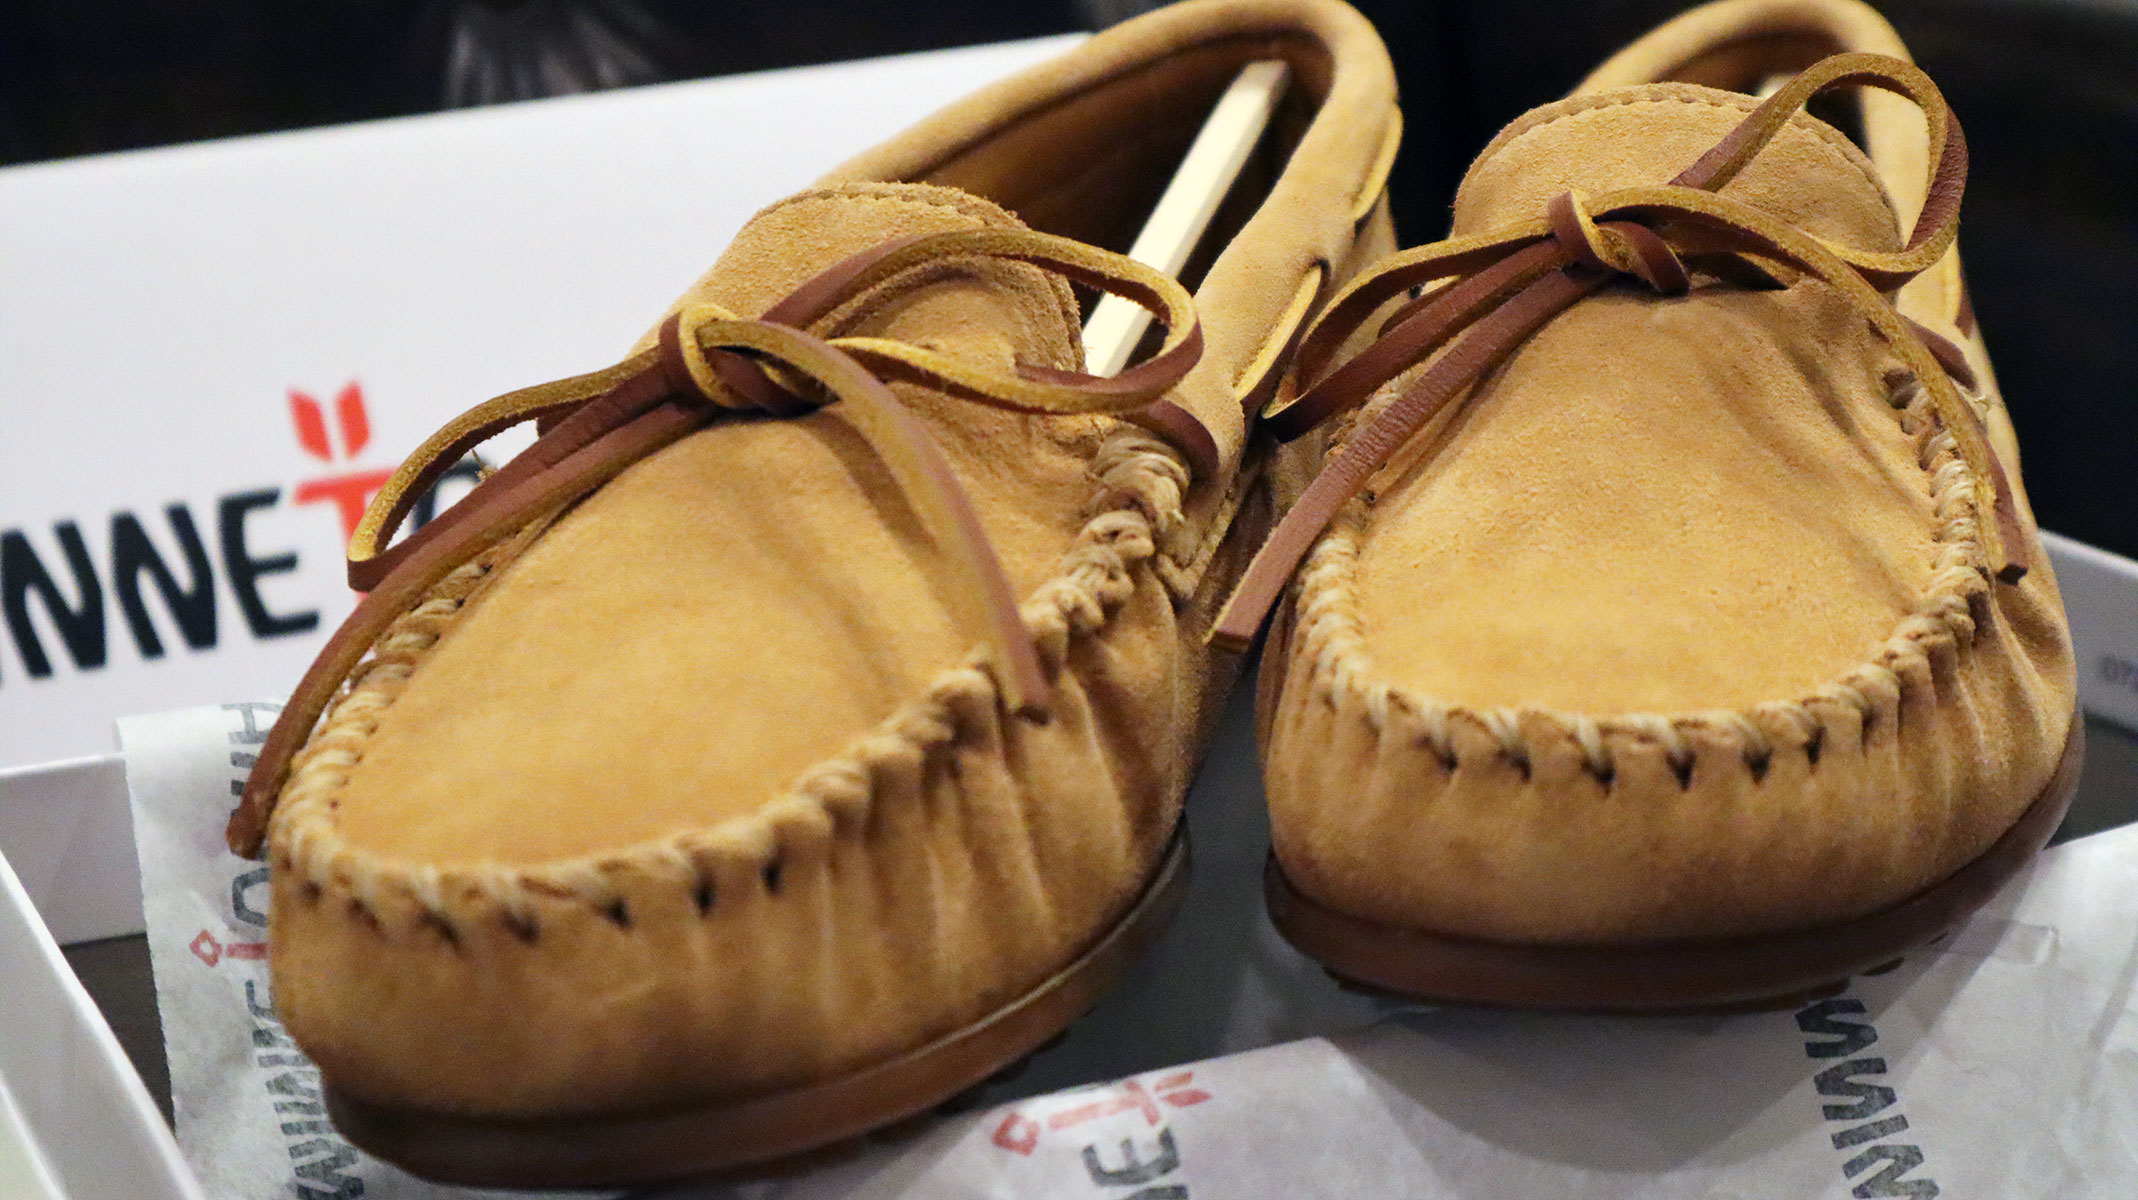 Auto duizend laat staan Minnetonka Review: The Best Moccasins for the Price?